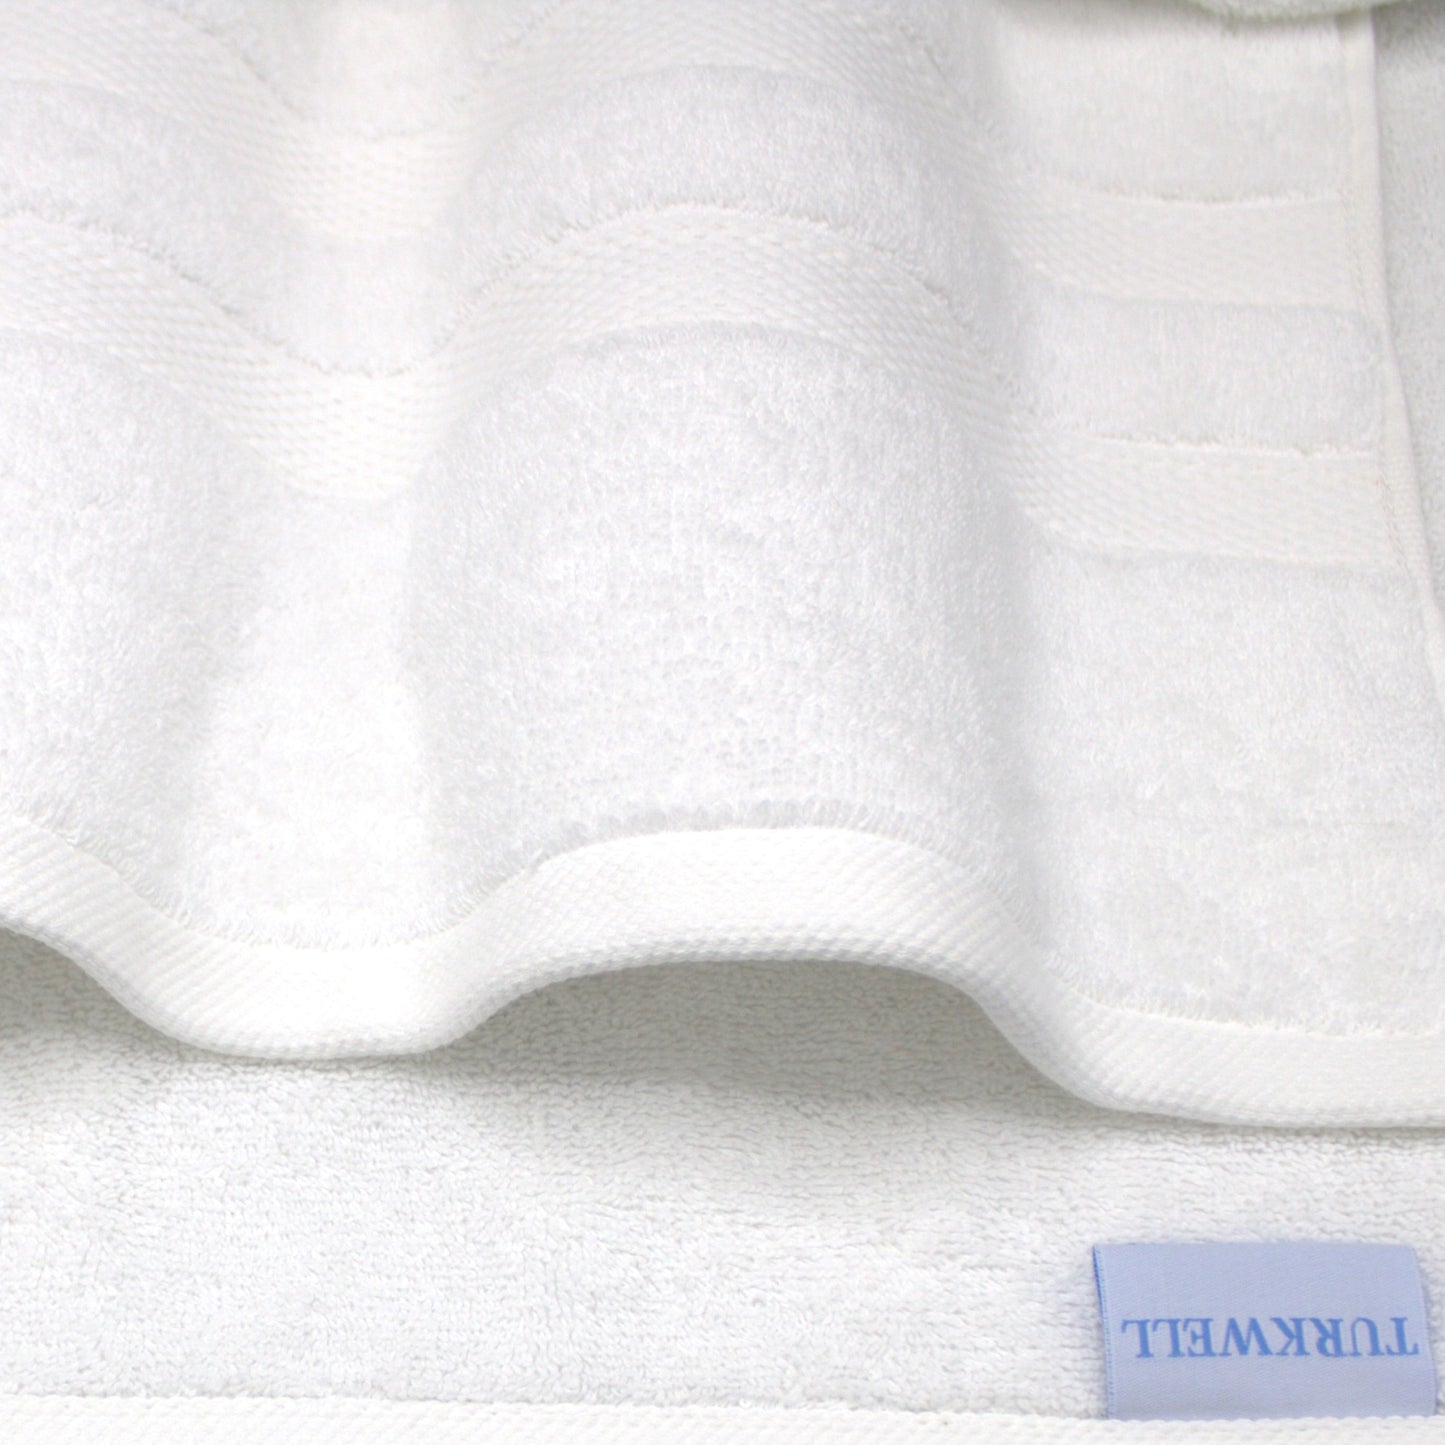 Wholesale Turkwell Bath Towels 100% Combed Cotton, 27x54 in, White, BOX of 12